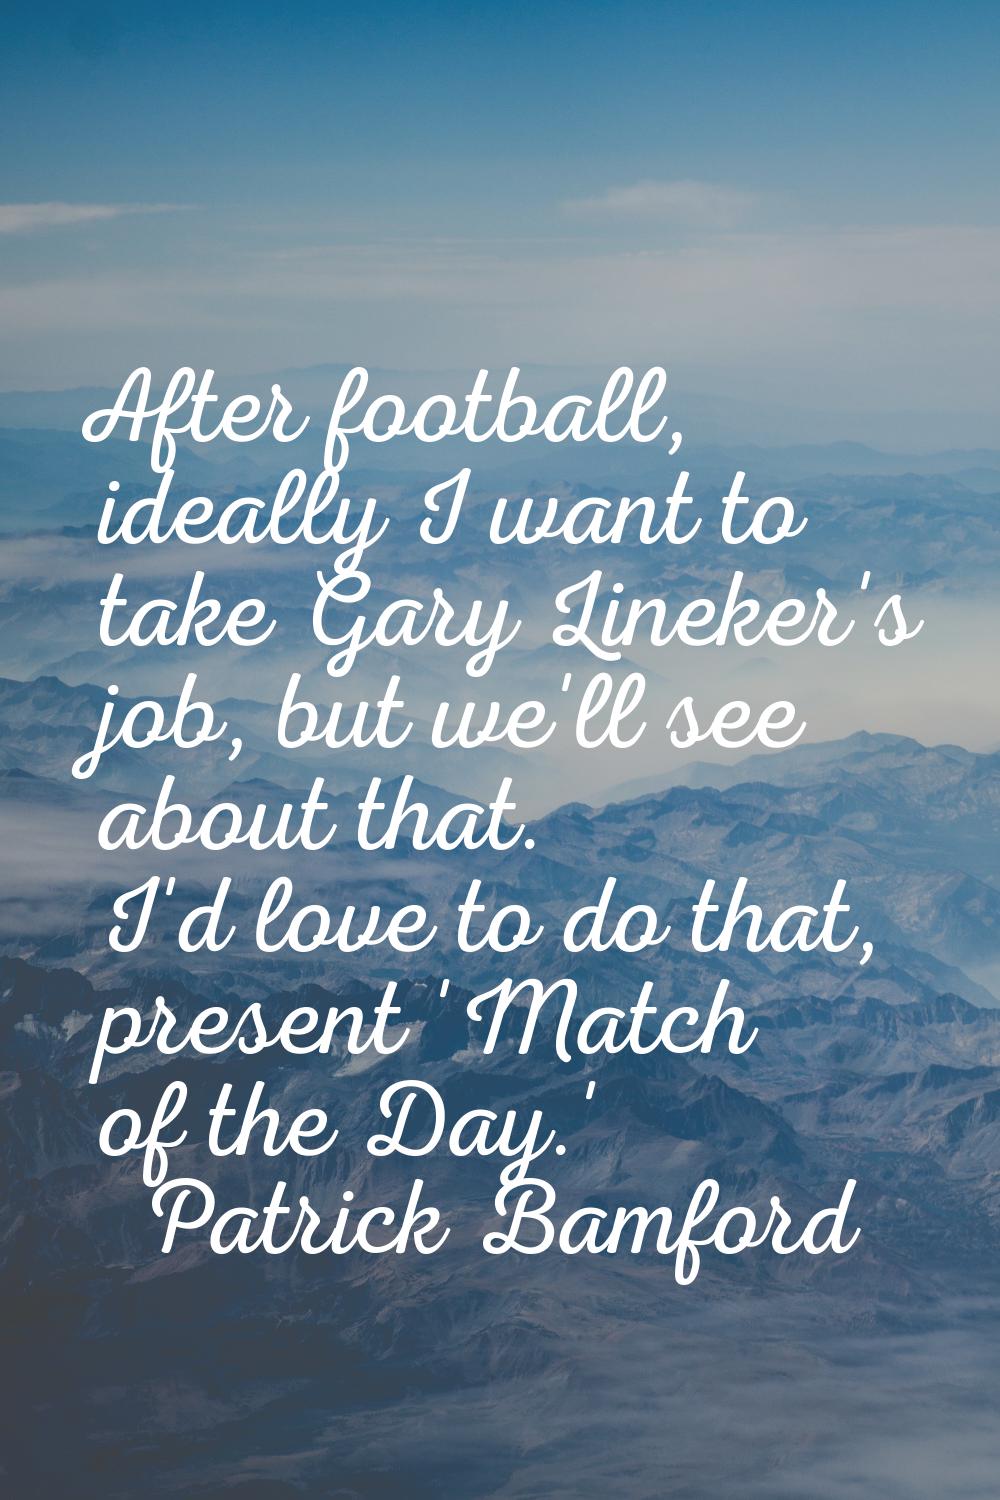 After football, ideally I want to take Gary Lineker's job, but we'll see about that. I'd love to do